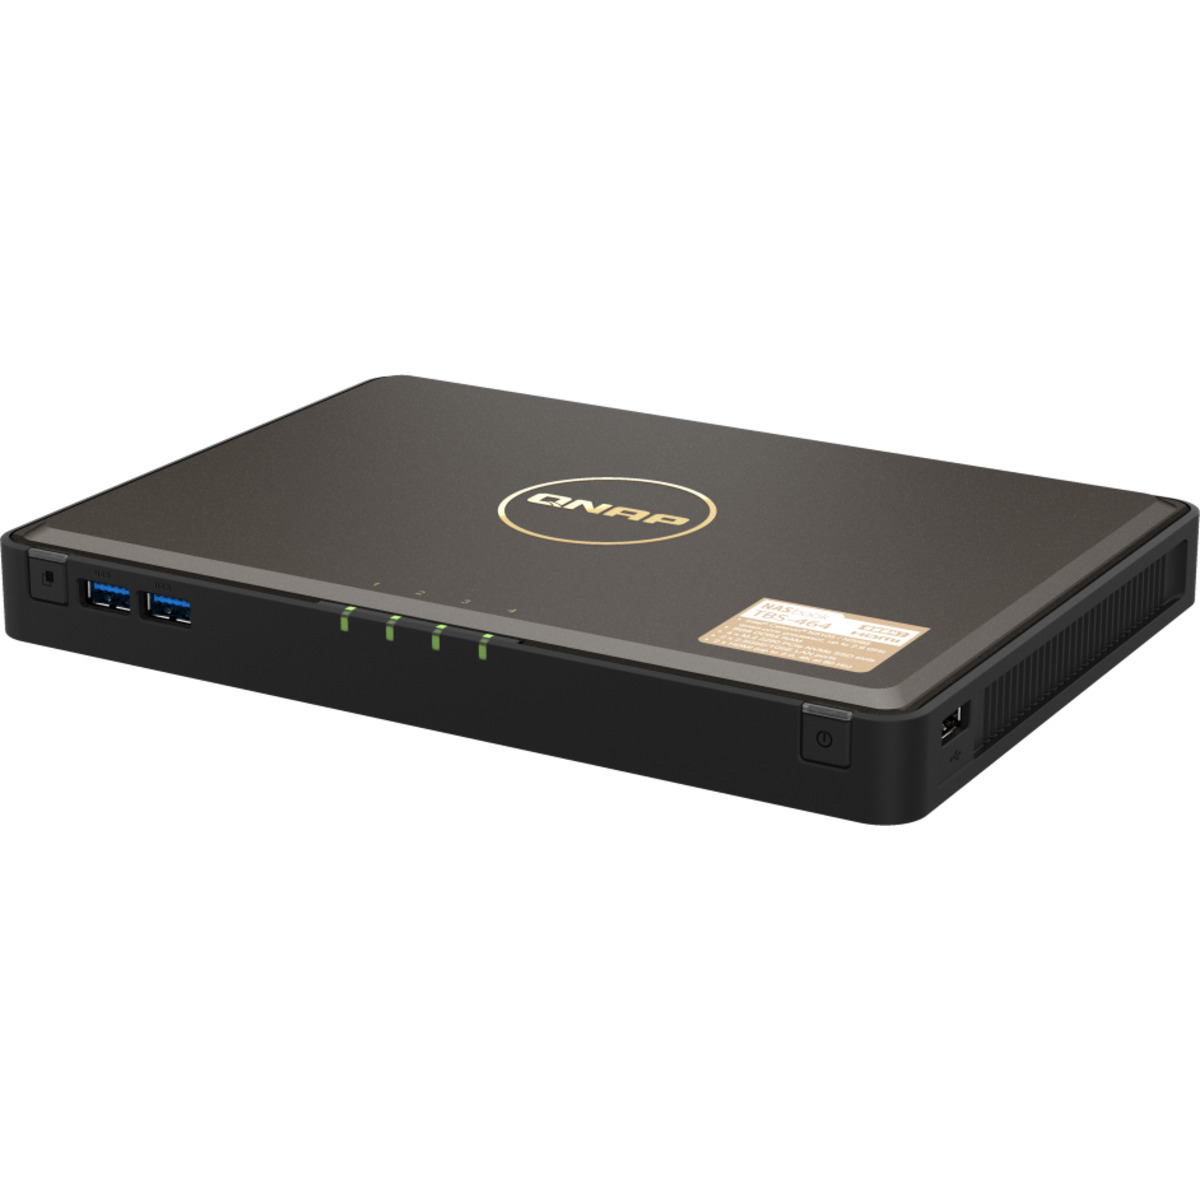 QNAP TBS-464 12tb 4-Bay Desktop Multimedia / Power User / Business NAS - Network Attached Storage Device 3x4tb Sabrent Rocket 5 SB-RKT5-4TB  14000/12000MB/s M.2 2280 NVMe SSD CONSUMER Class Drives Installed - Burn-In Tested TBS-464